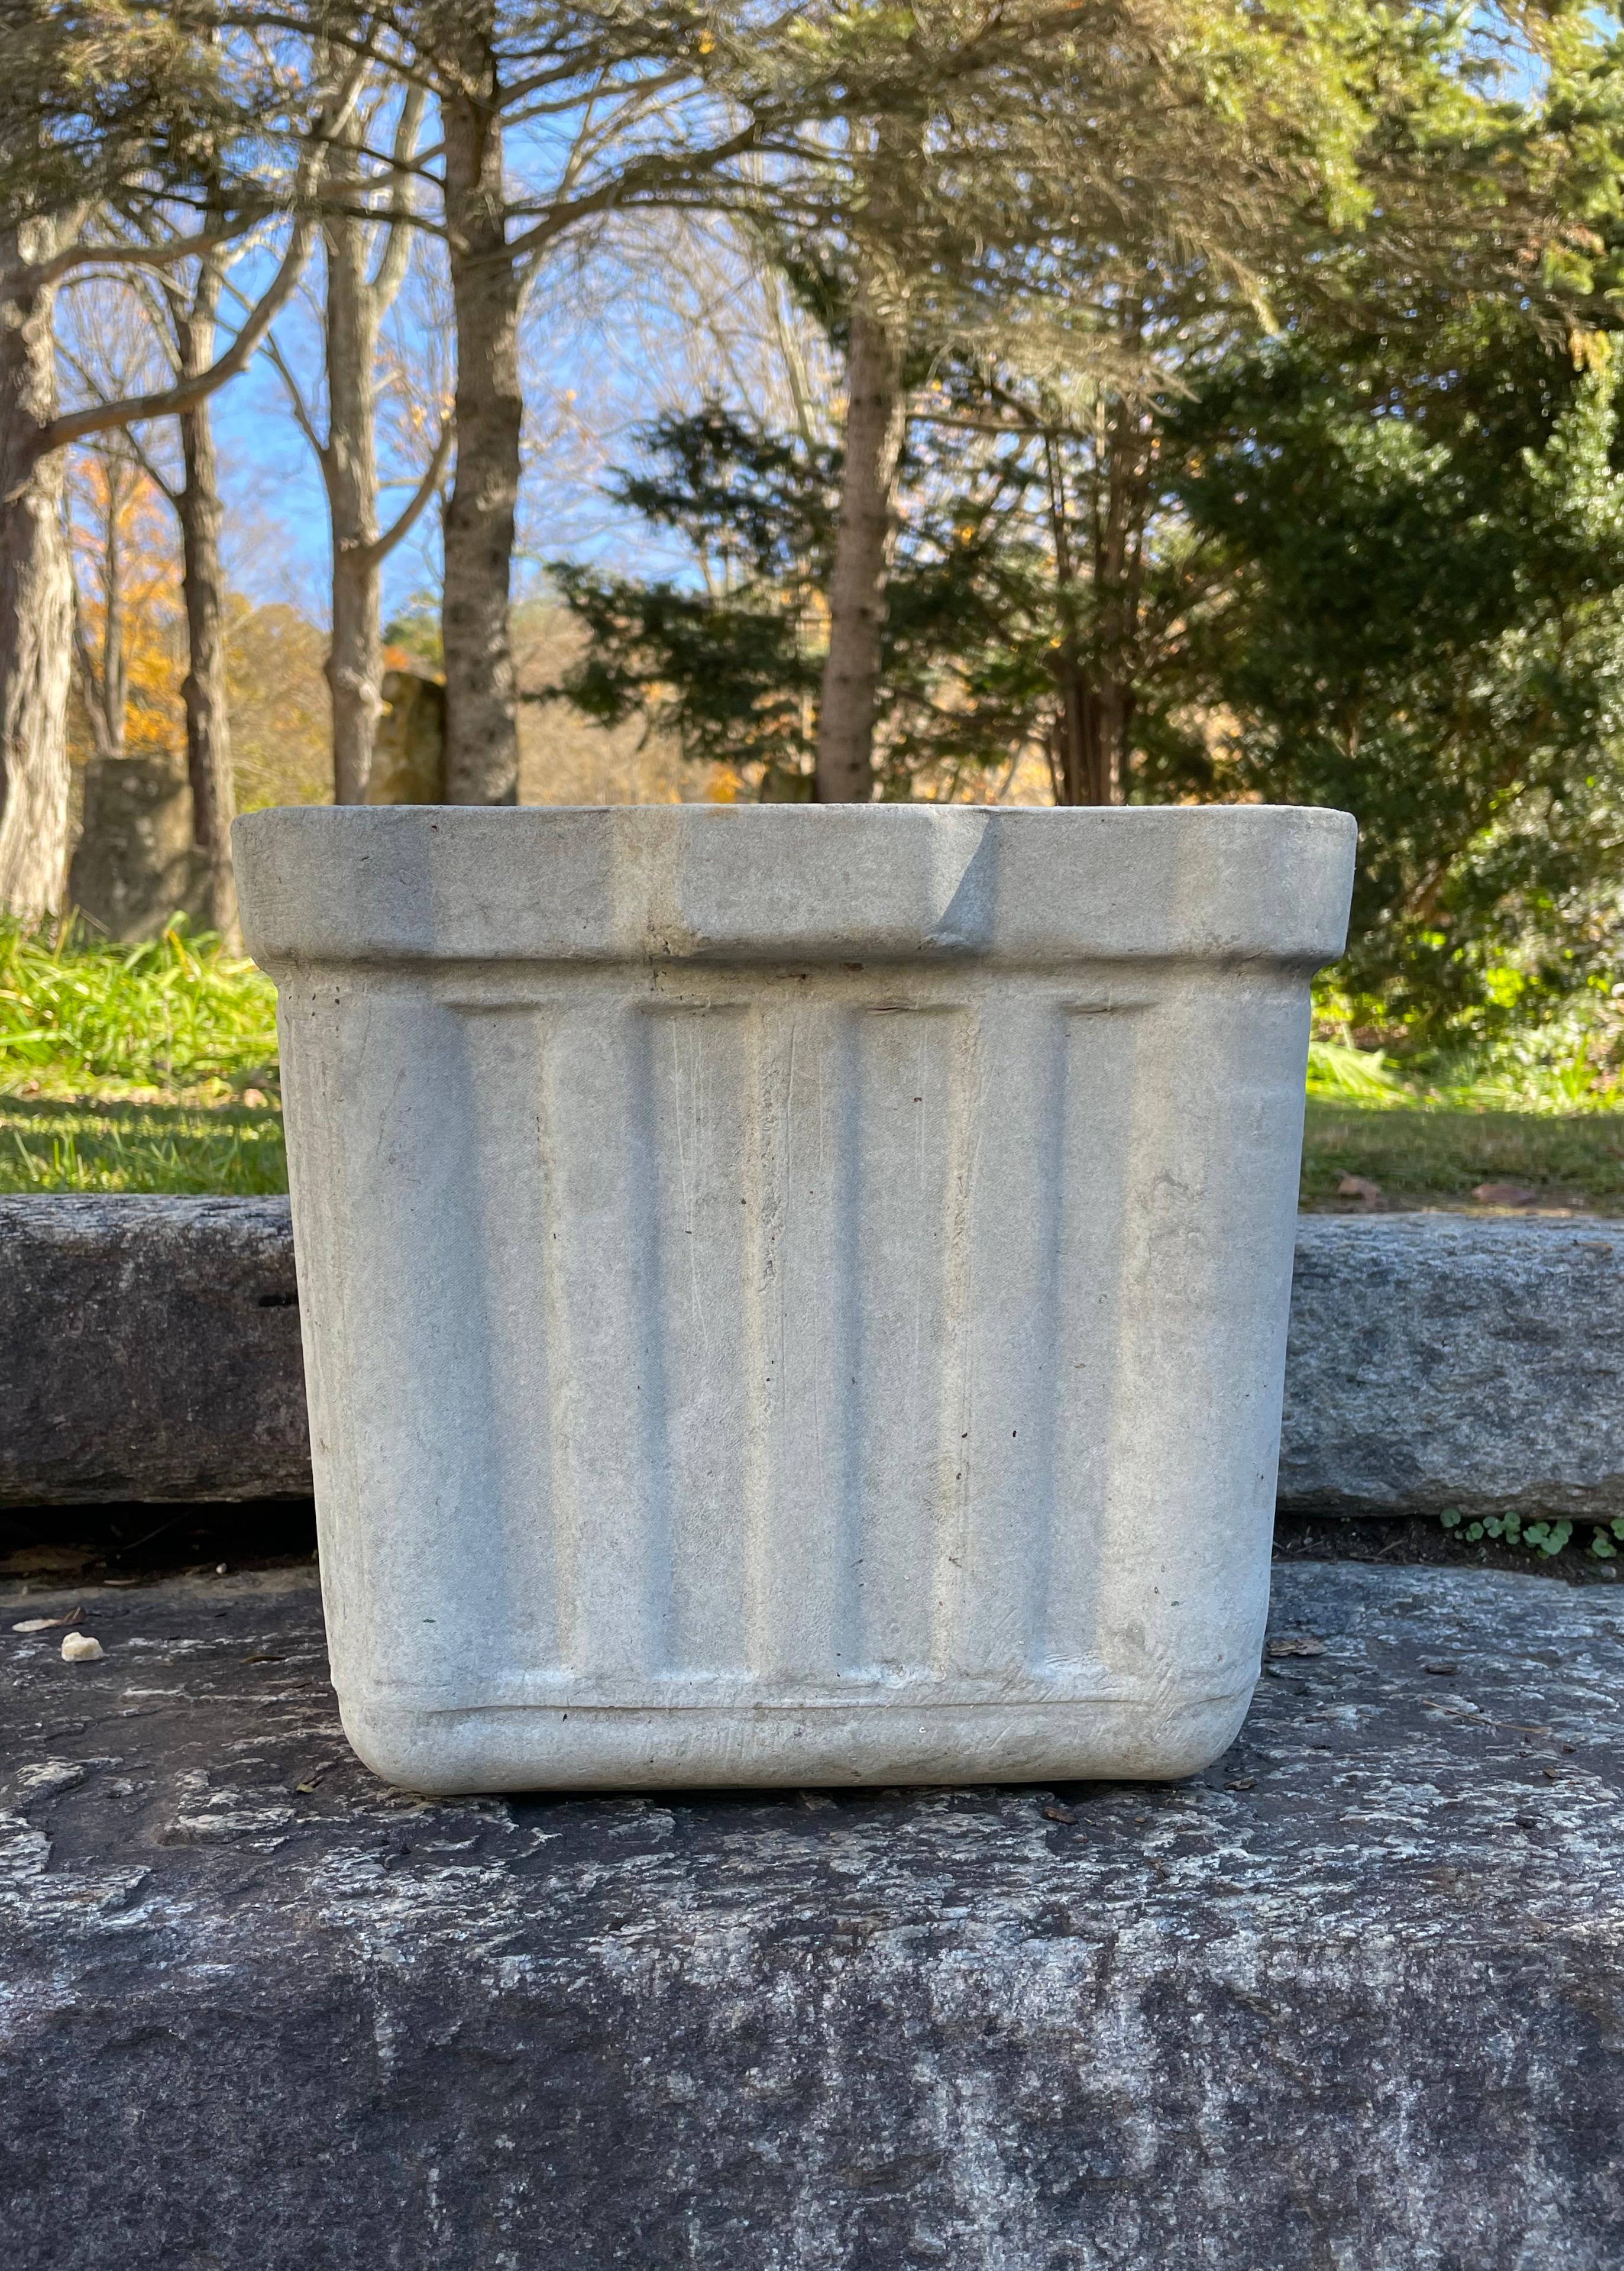 Designed by the iconic Willy Guhl in the 1960s and made of strong and lightweight fiber cement by Eternit, SA of Switzerland, this small square planter has a natural unpainted patina and is in excellent condition. Plant it up with low mounded moss